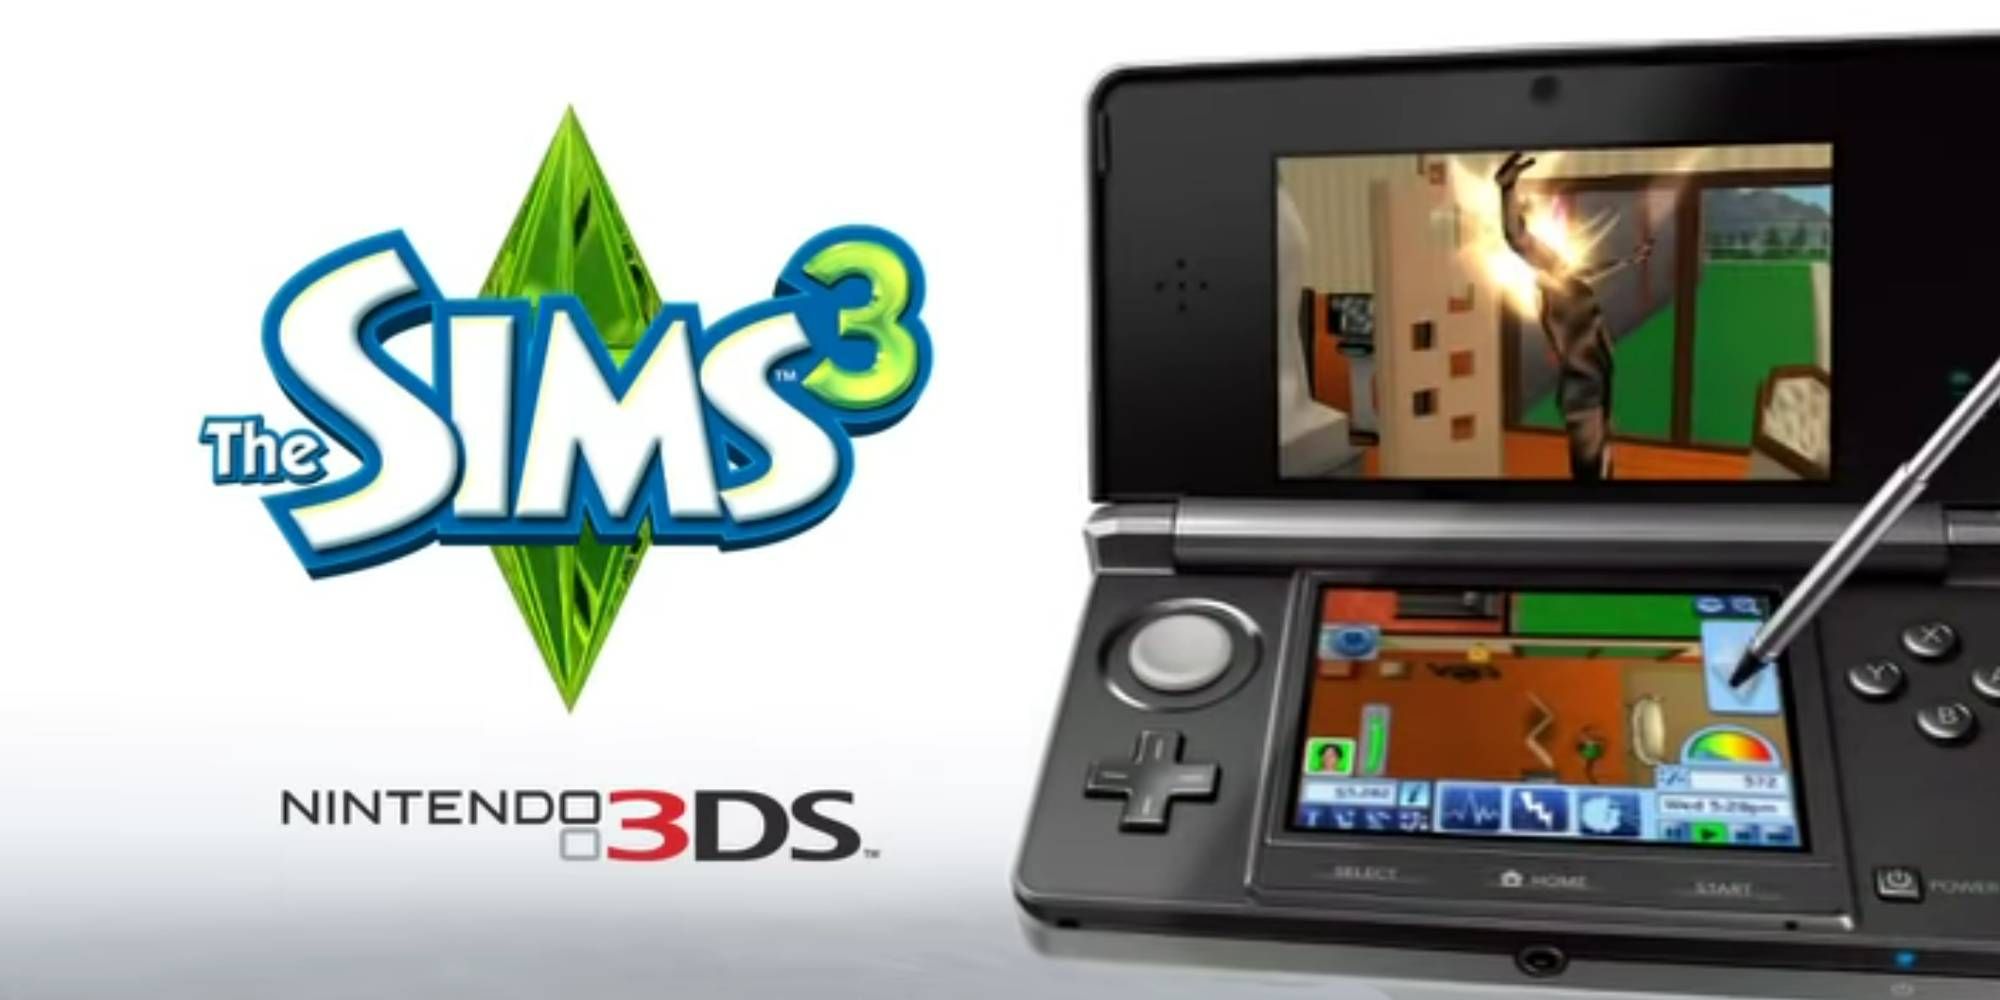 The Sims 3 logo on top of the Nintendo 3DS logo with the device to the right